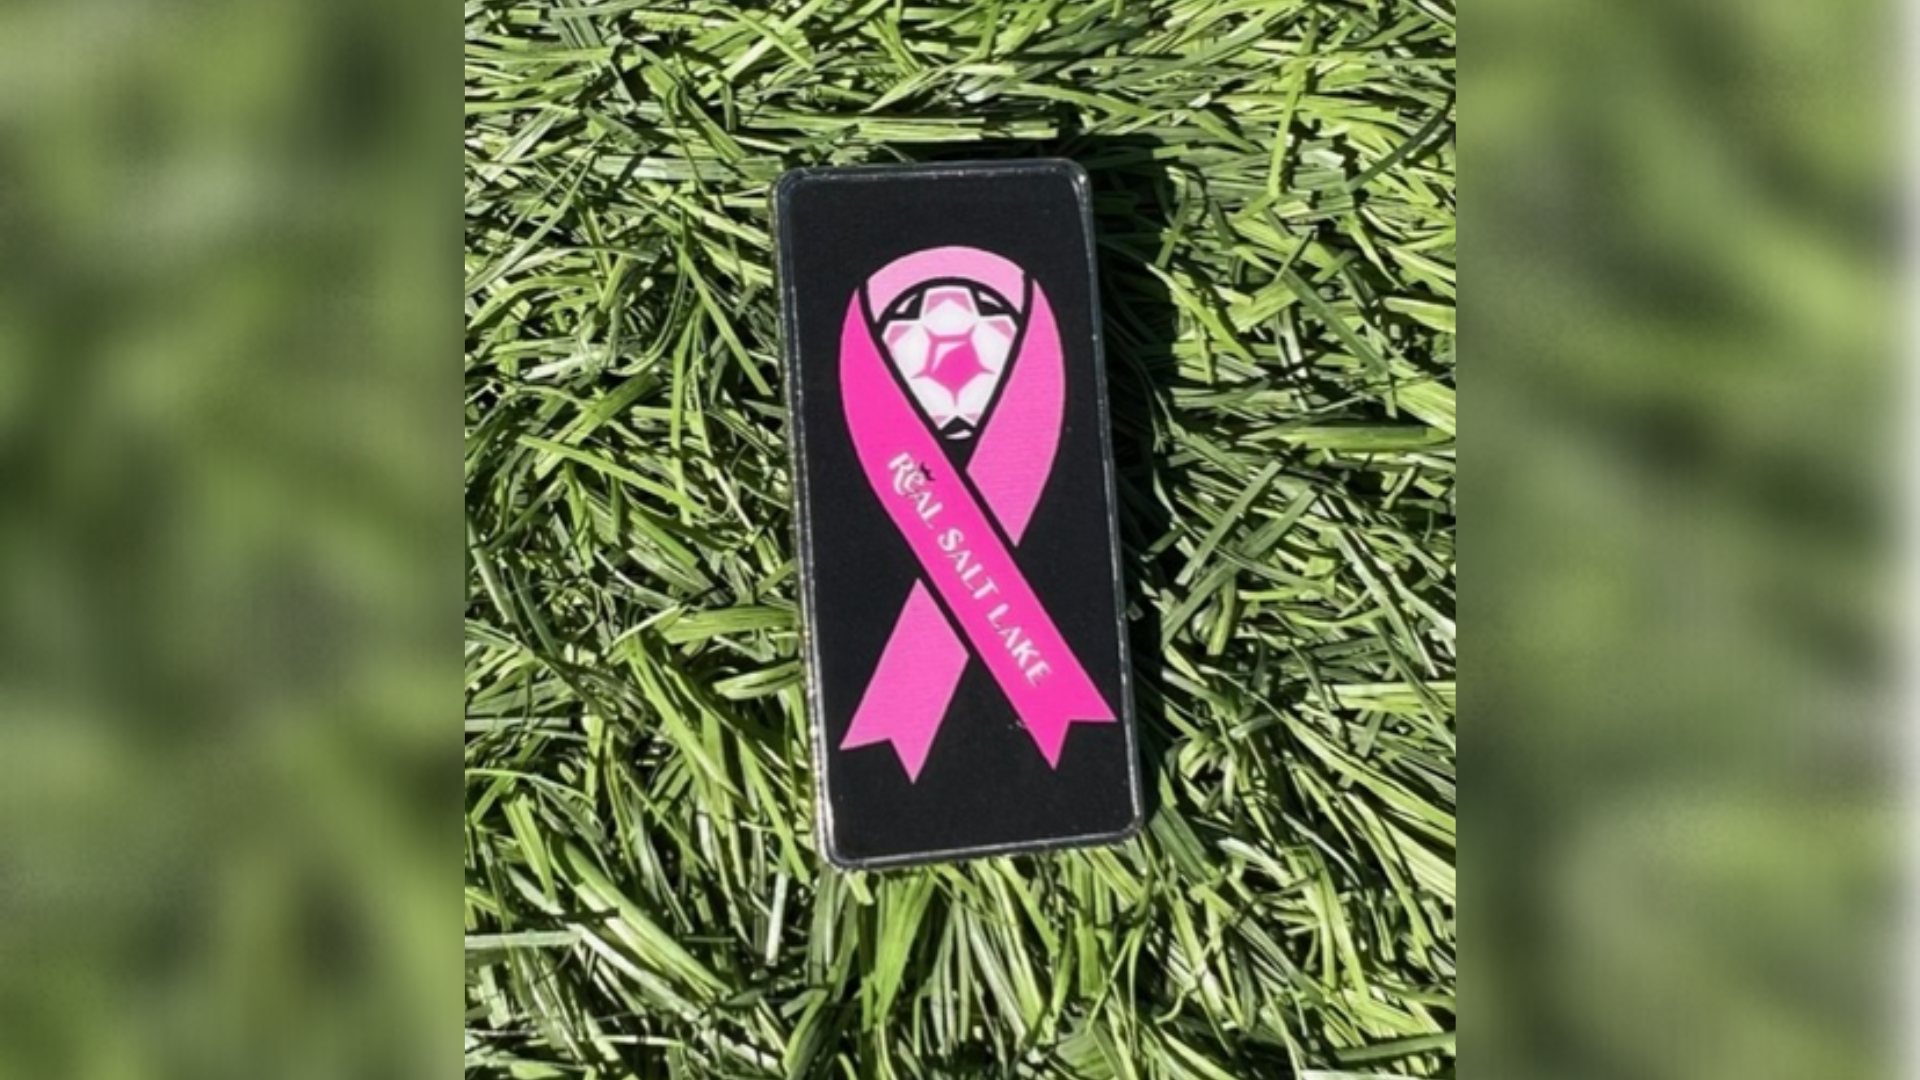 The RSL pin with a pink ribbon on it is pictured...